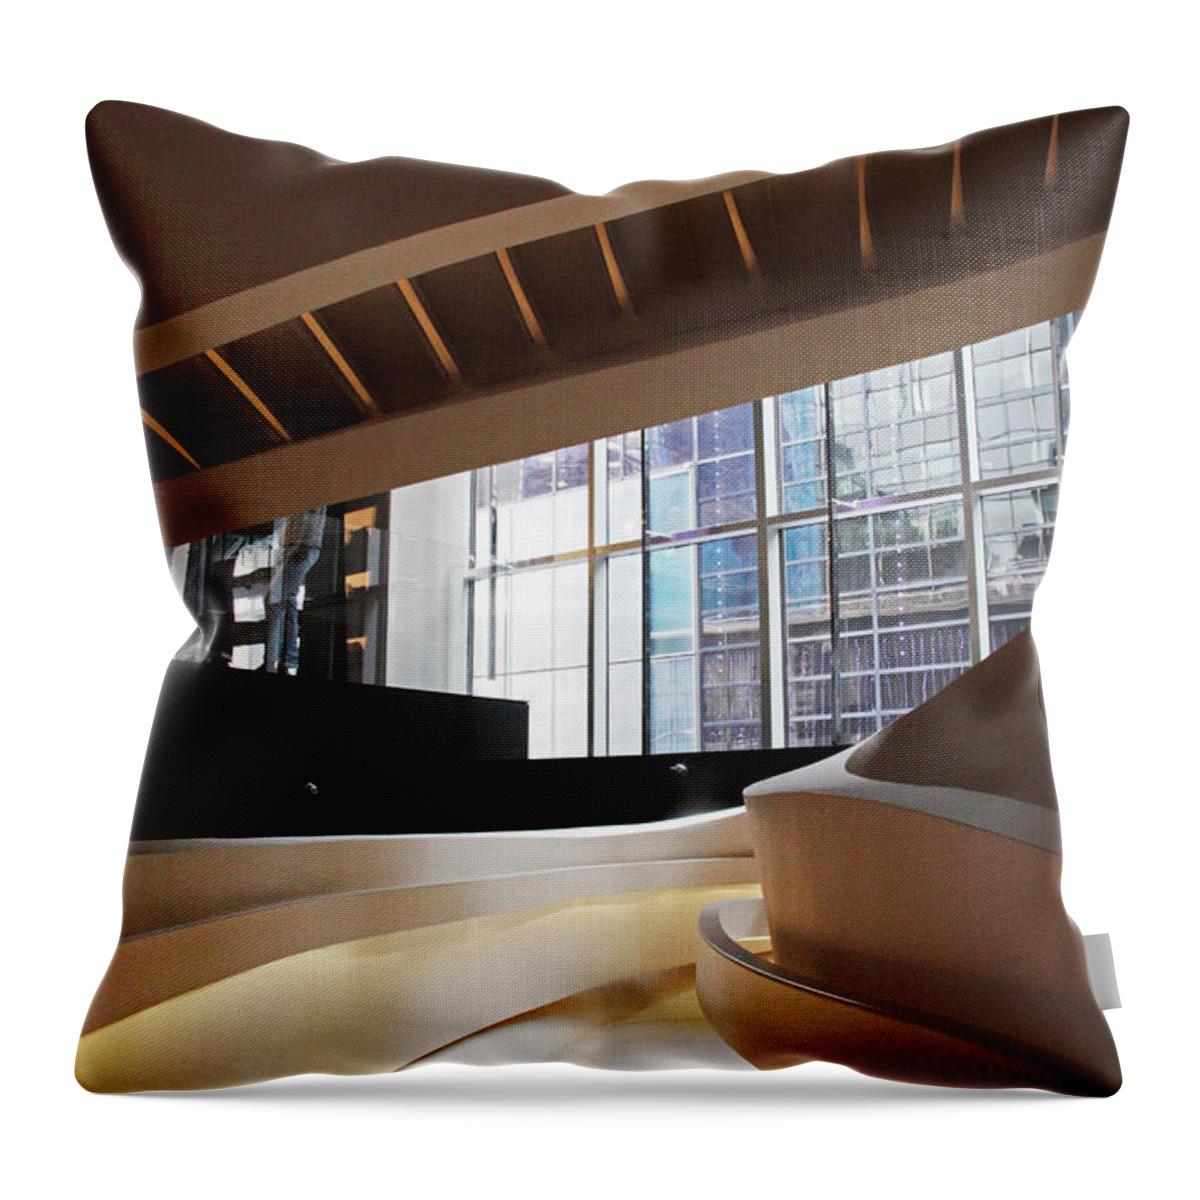 Design Throw Pillow featuring the photograph Sinuous Staircase by Jessica Jenney